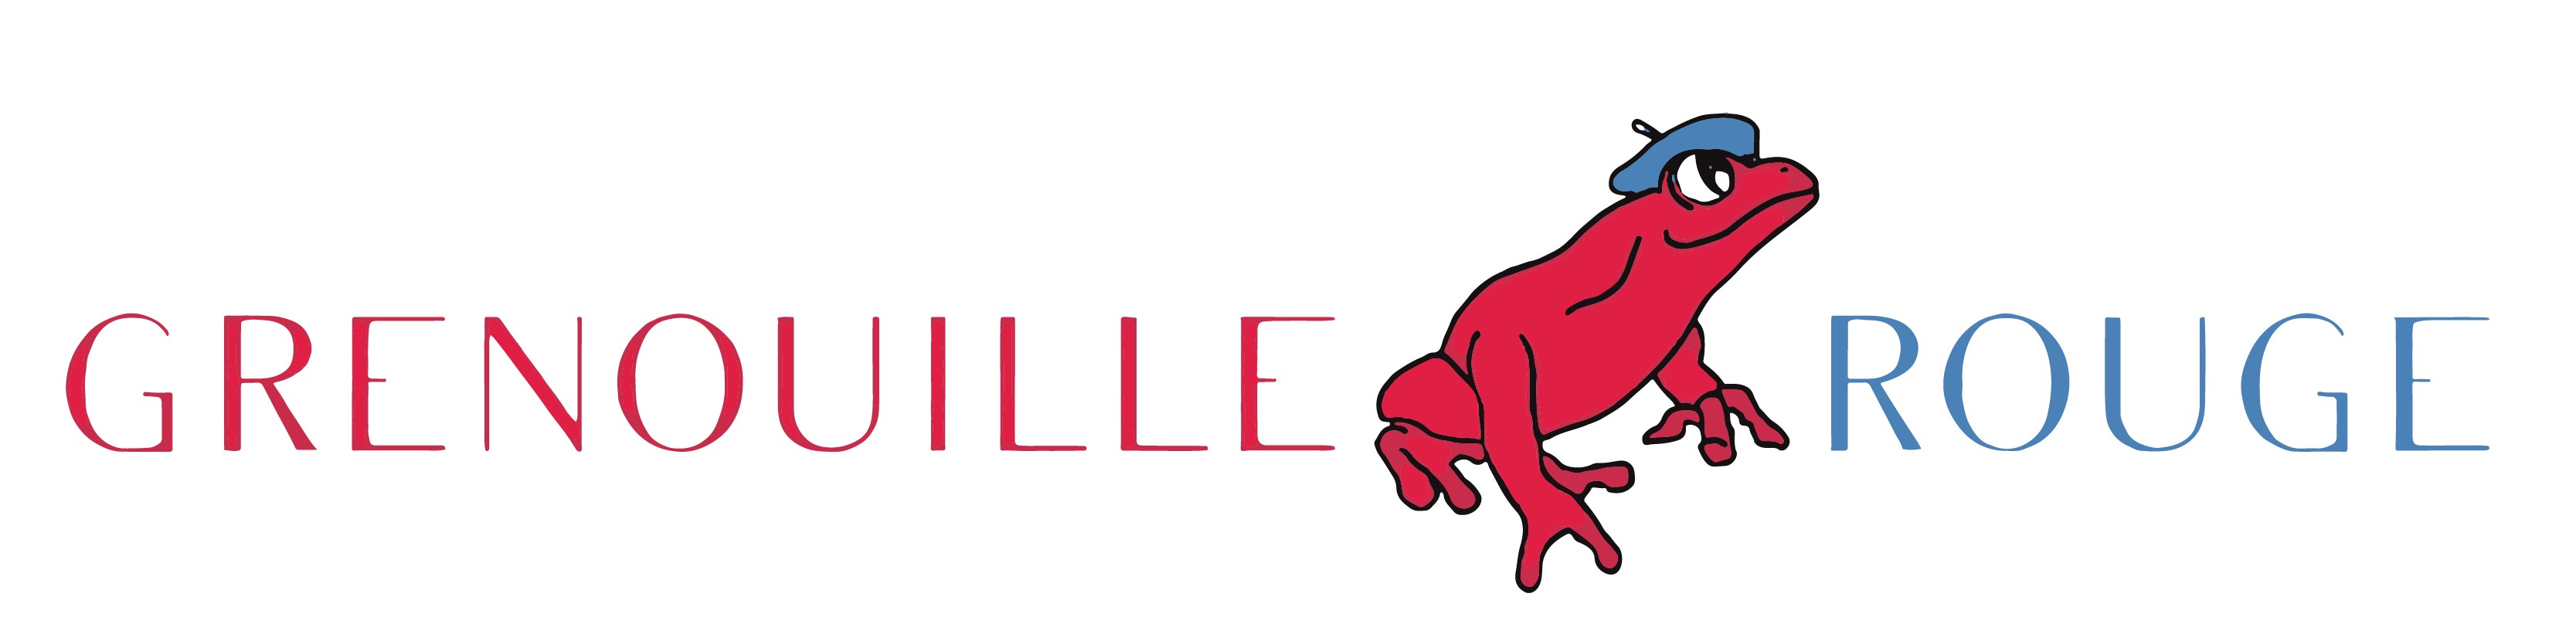 Grenouille Rouge